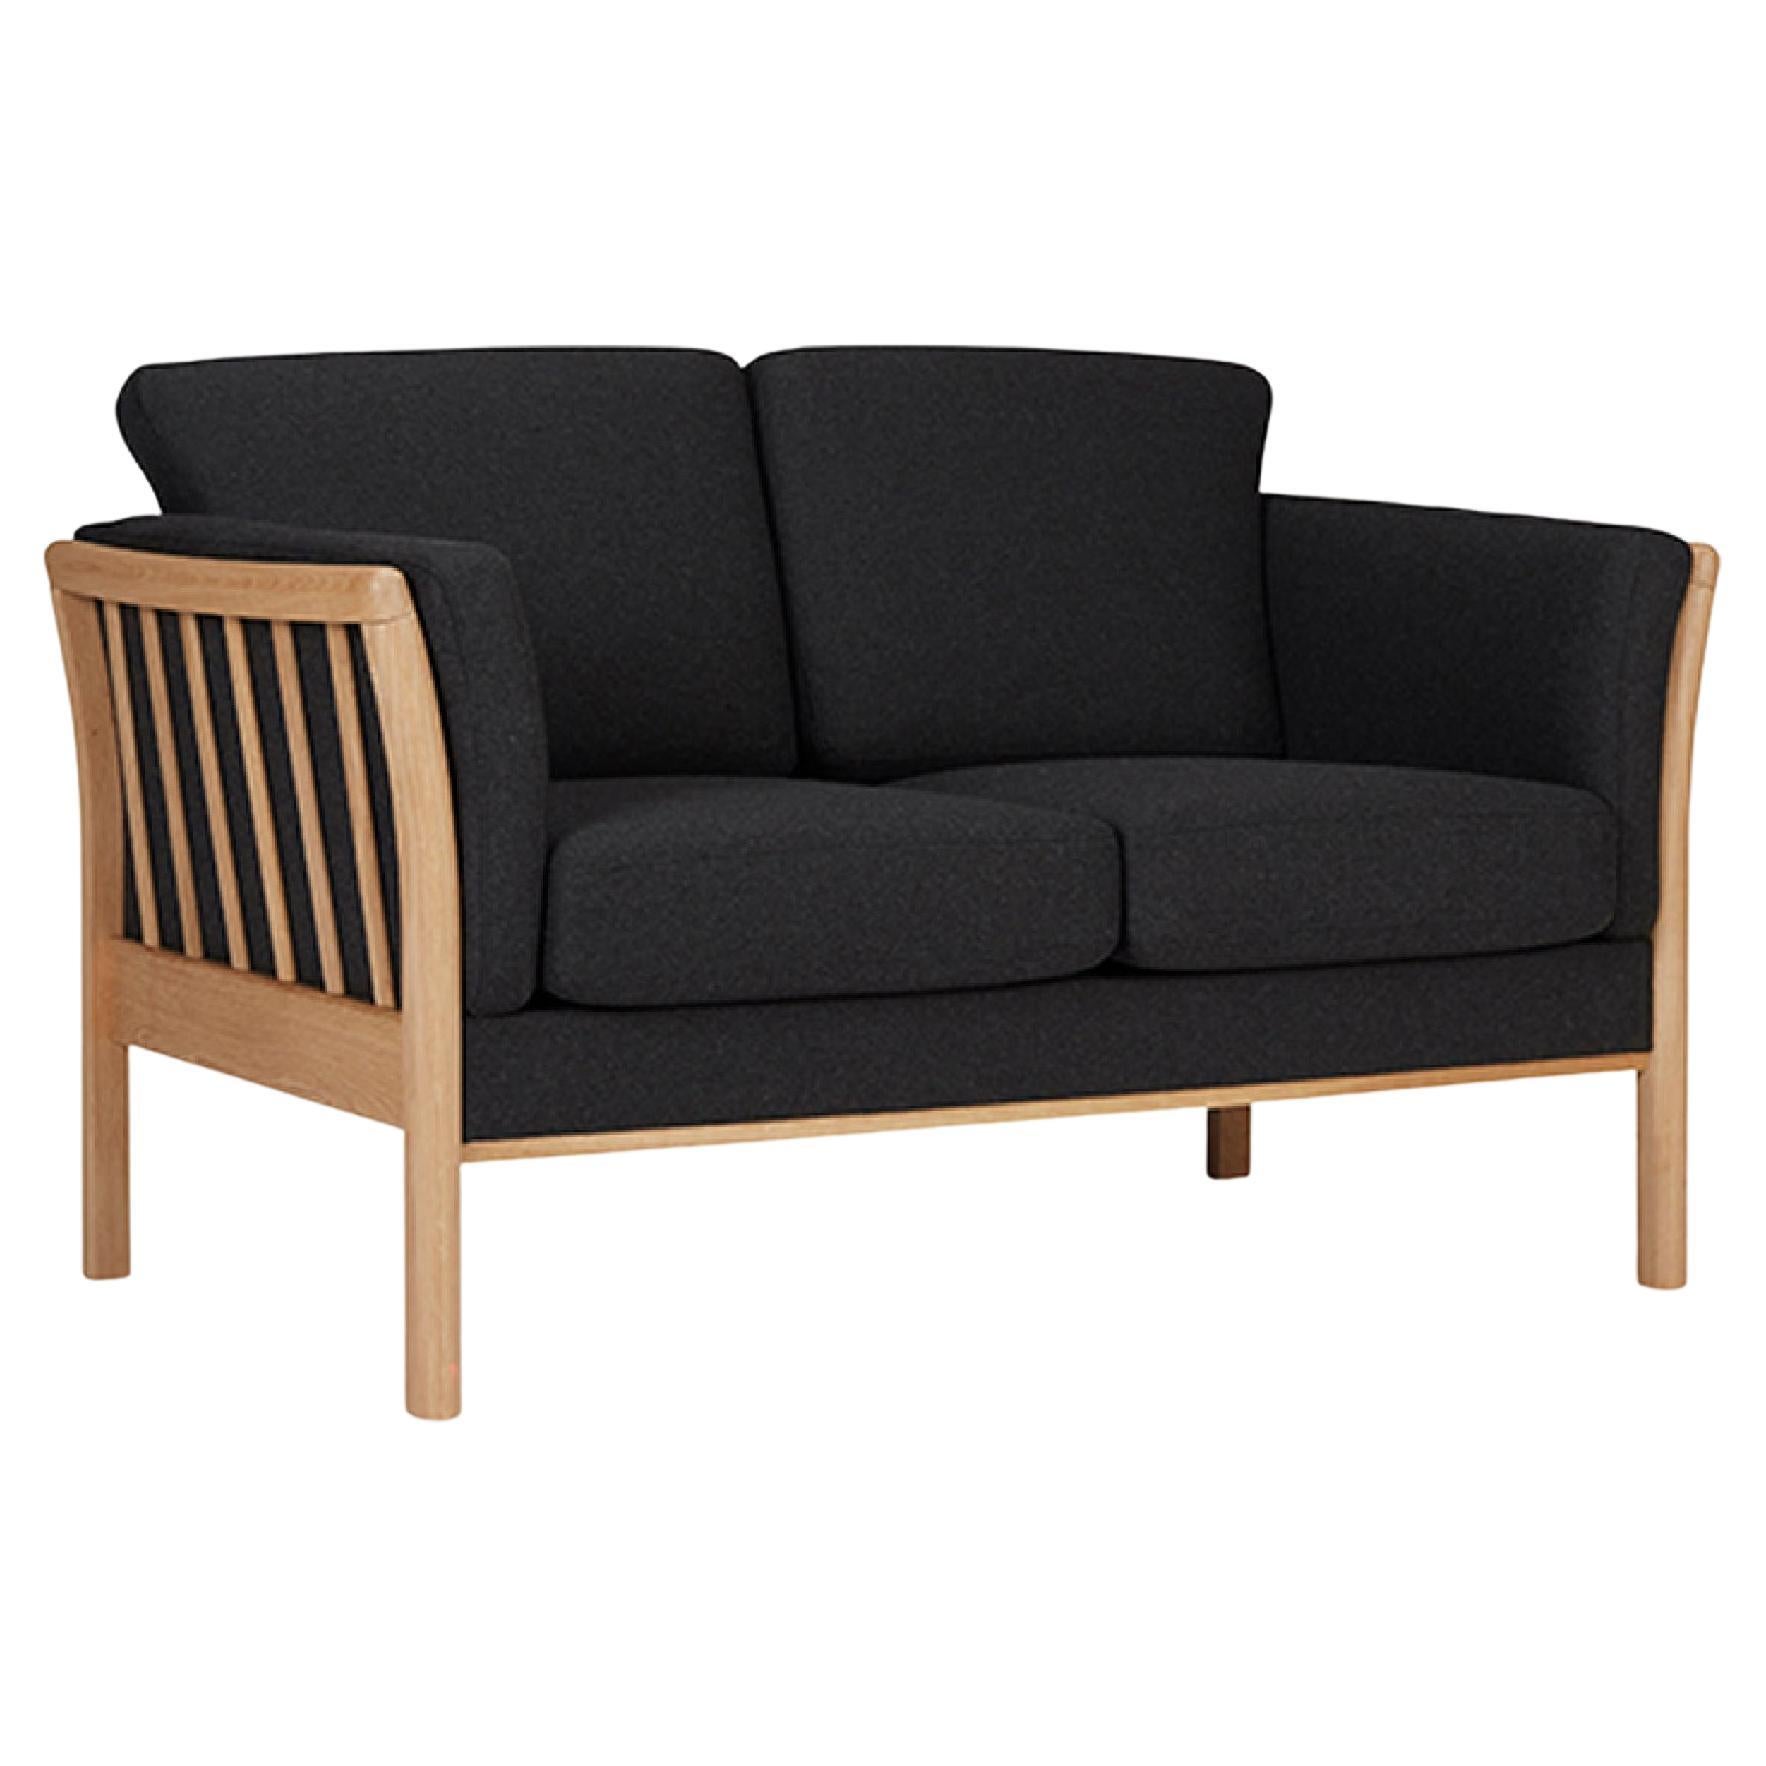  Hayche Oscar 2 Seater Sofa - Black, UK, Made to Order For Sale